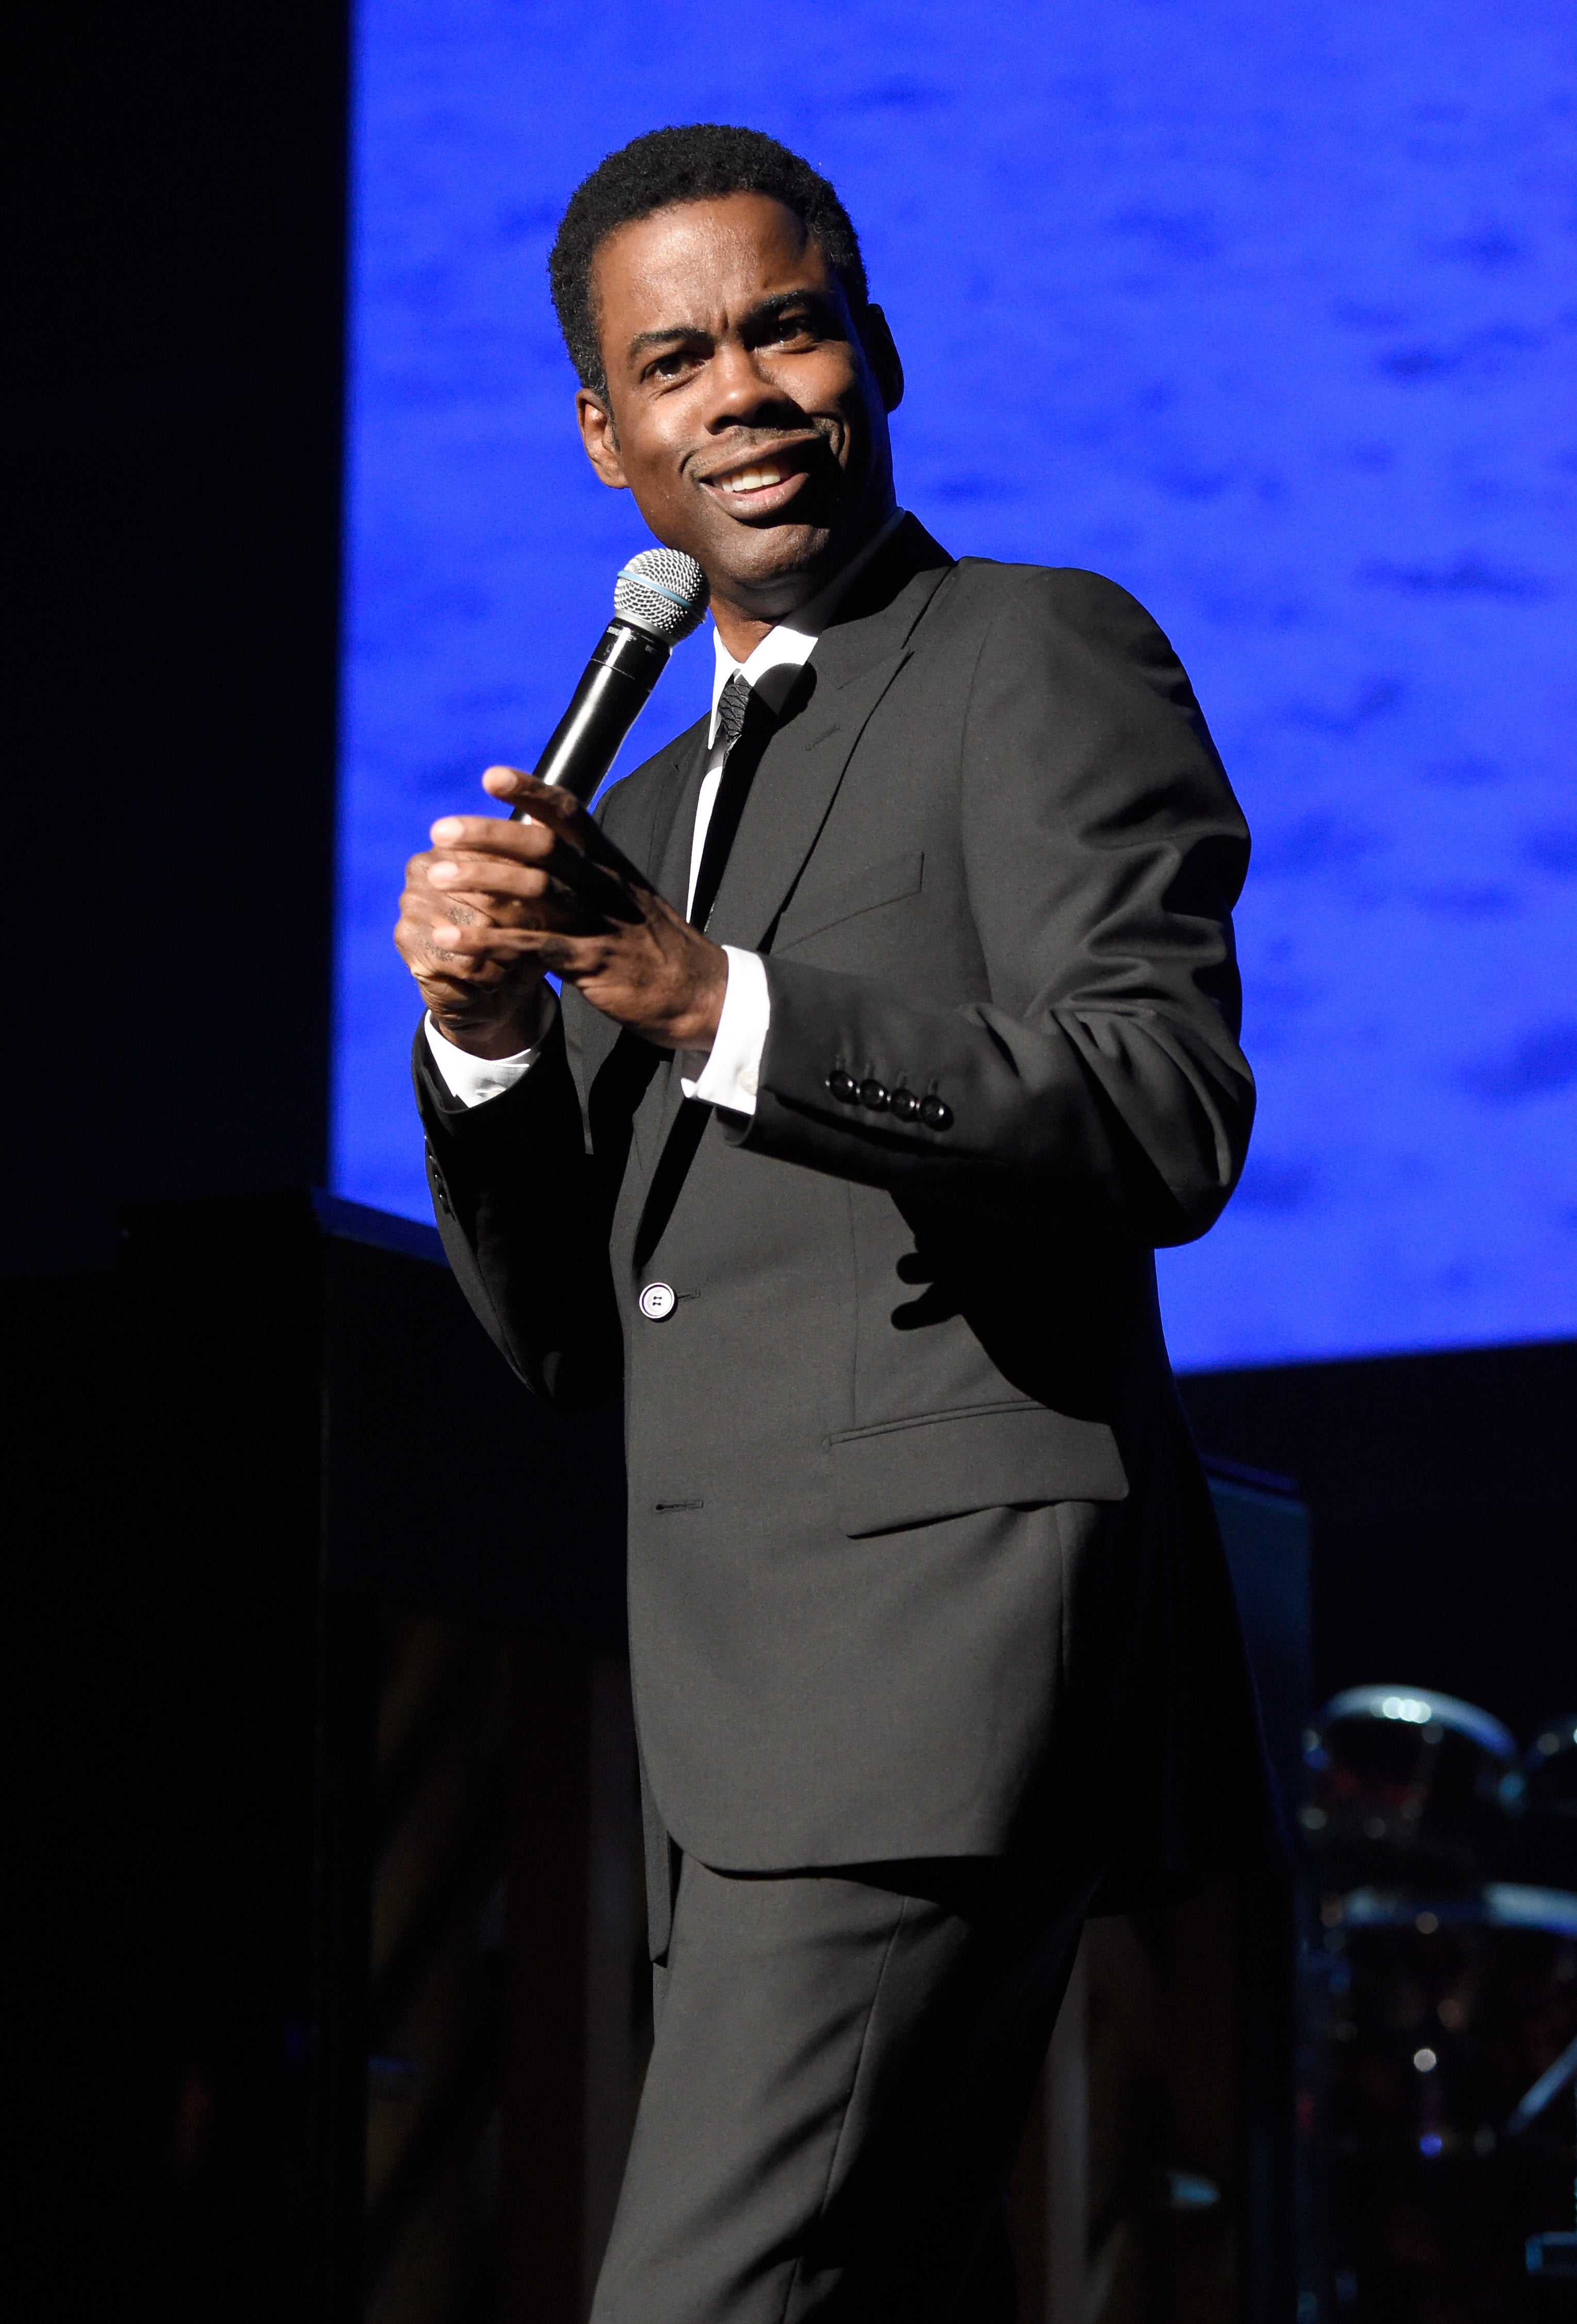 Chris Rock Sets Record – And Earns Big Bucks – With New Netflix Stand-Up Deal
